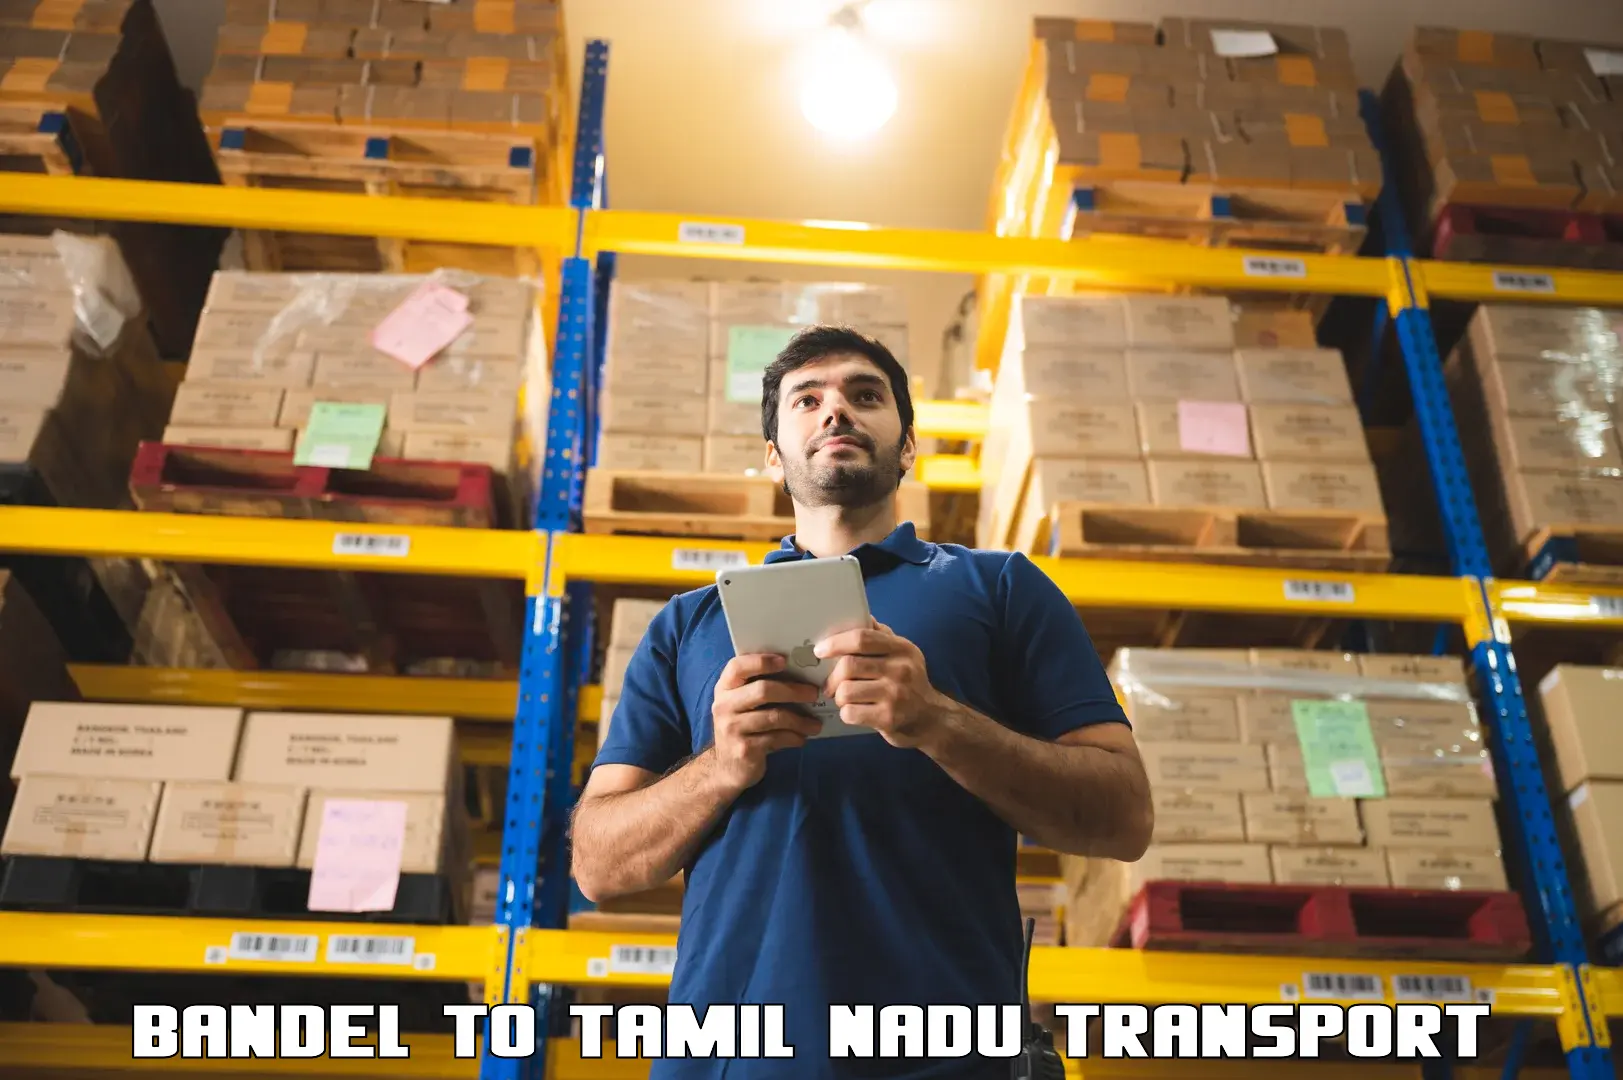 Truck transport companies in India Bandel to Anthiyur